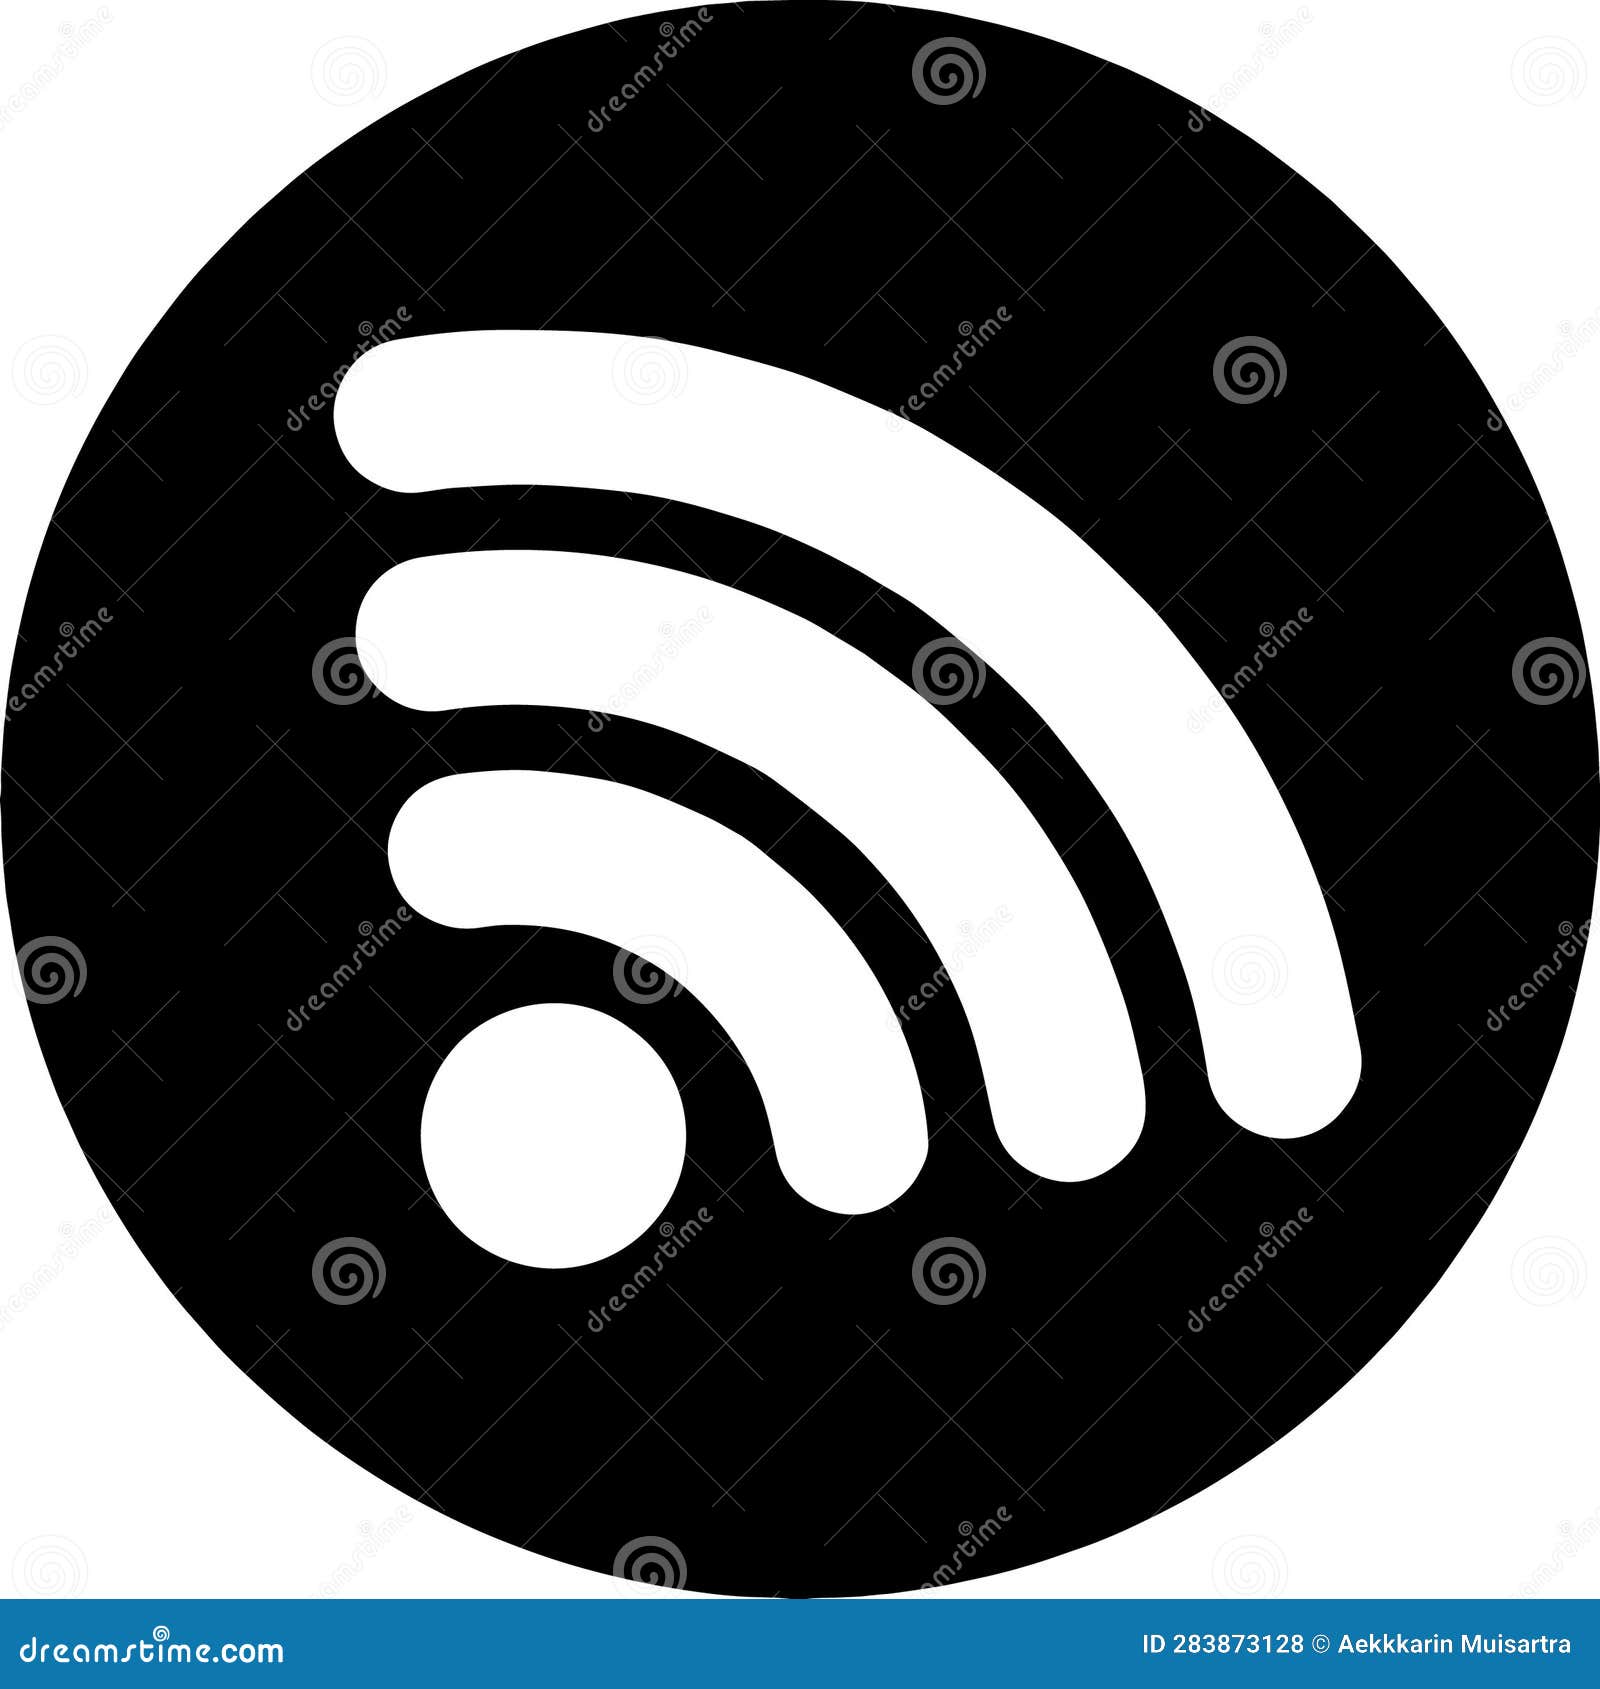 black-and-white wifi signal image in italics the background is a black circle.